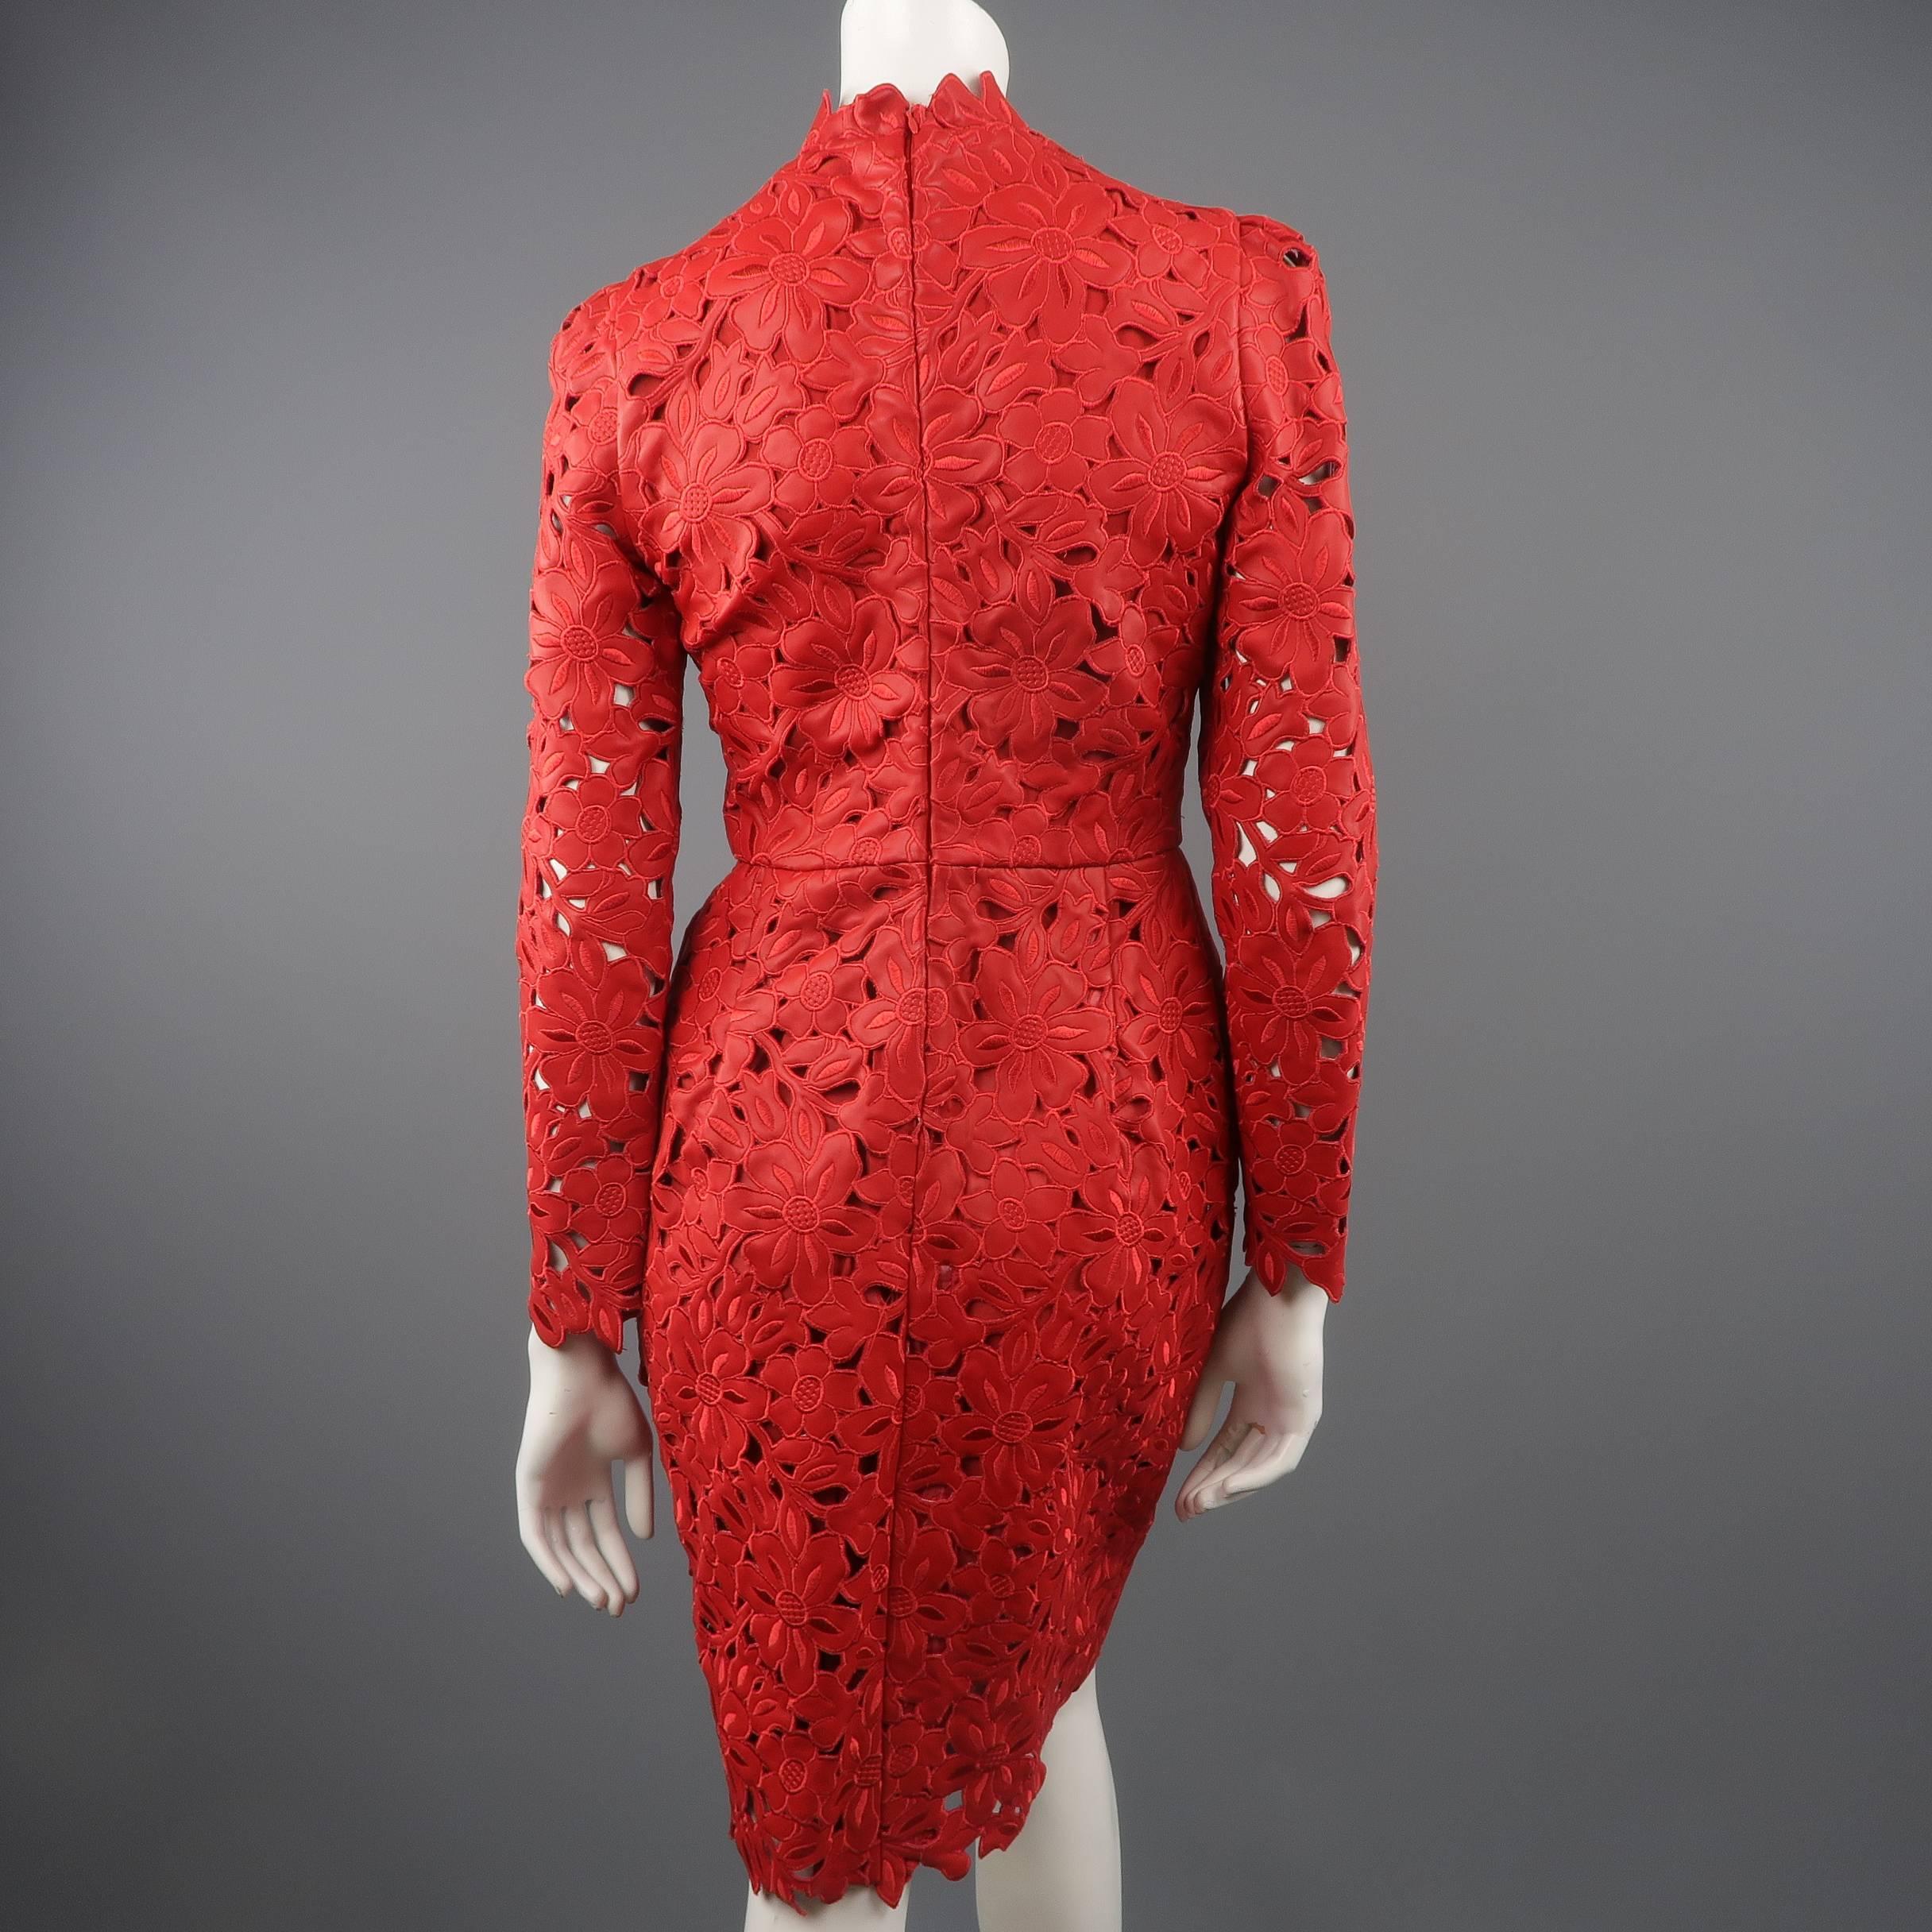 Valentino Red Leather Dress - 50th Anniversary - Fall 2012 Runway - Retail $9800 4